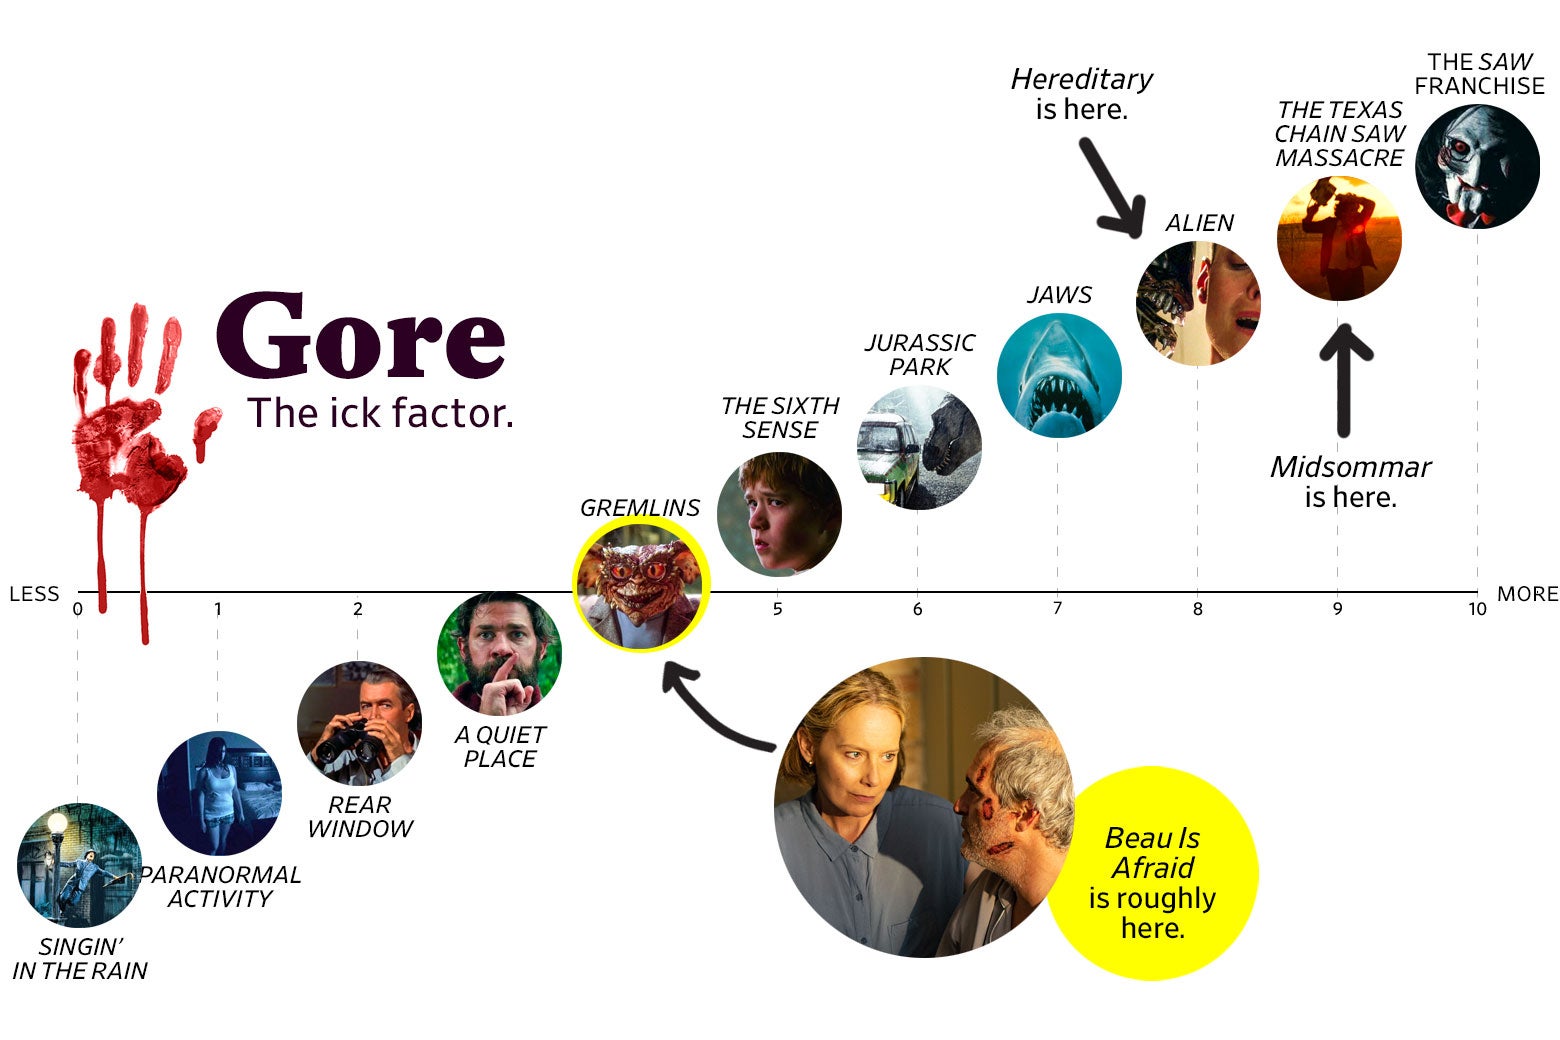 A chart titled “Gore: the Ick Factor” shows that Beau Is Afraid ranks a 4, roughly the same as Gremlins, whereas Midsommar ranked a 9 in goriness, roughly the same as the Texas Chain Saw Massacre, and Hereditary ranked an 8, roughly the same as Alien. The scale ranges from Singin’ in the Rain (0) to the Saw franchise (10).